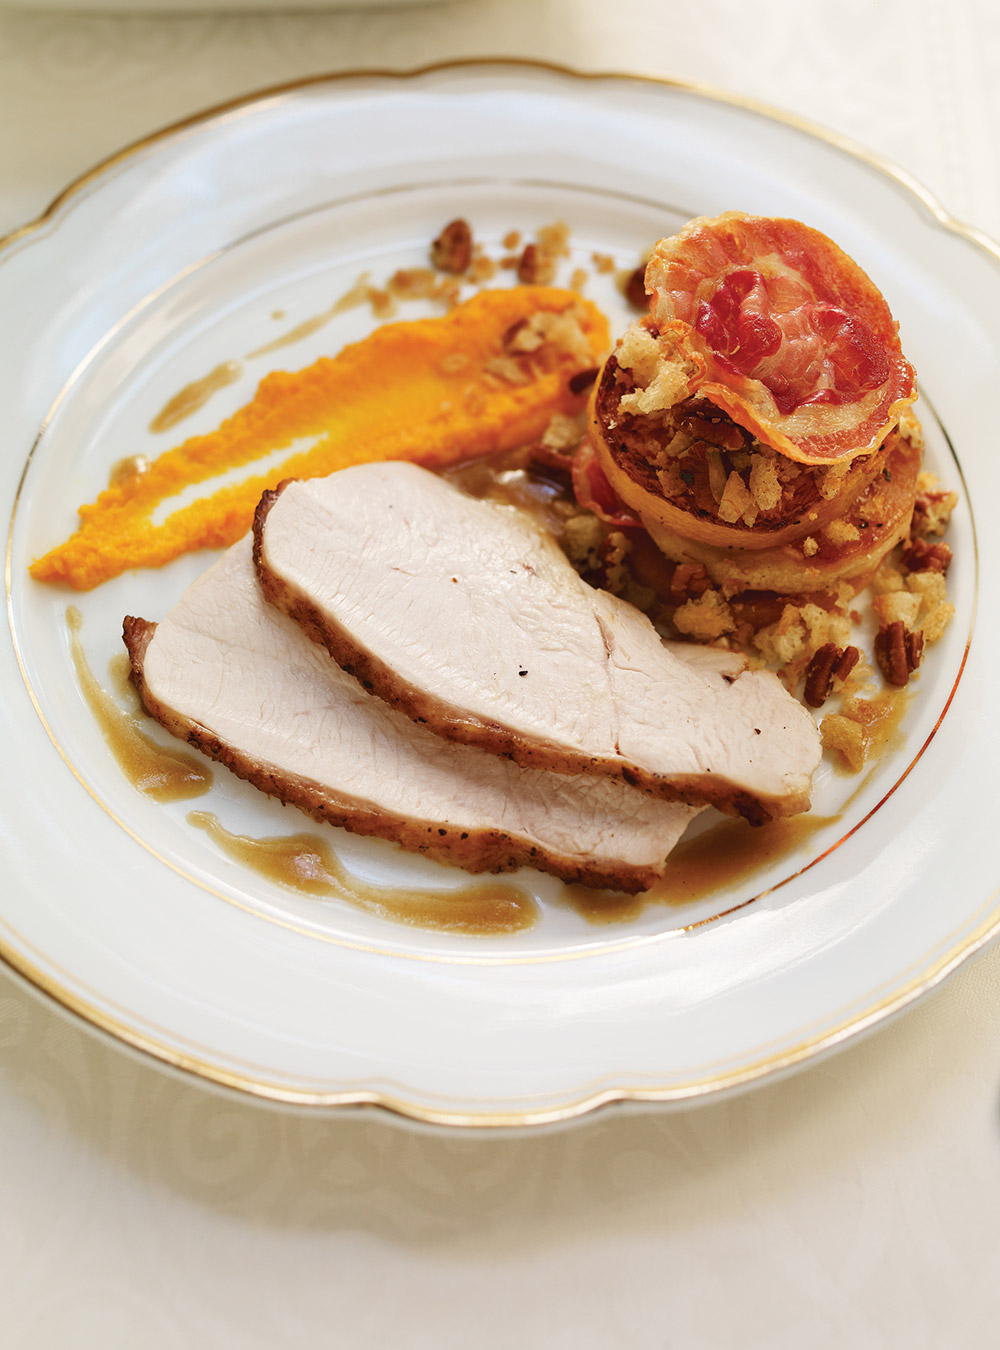 Roasted Turkey Breast with Apples, Pumpkin and Marsala Sauce